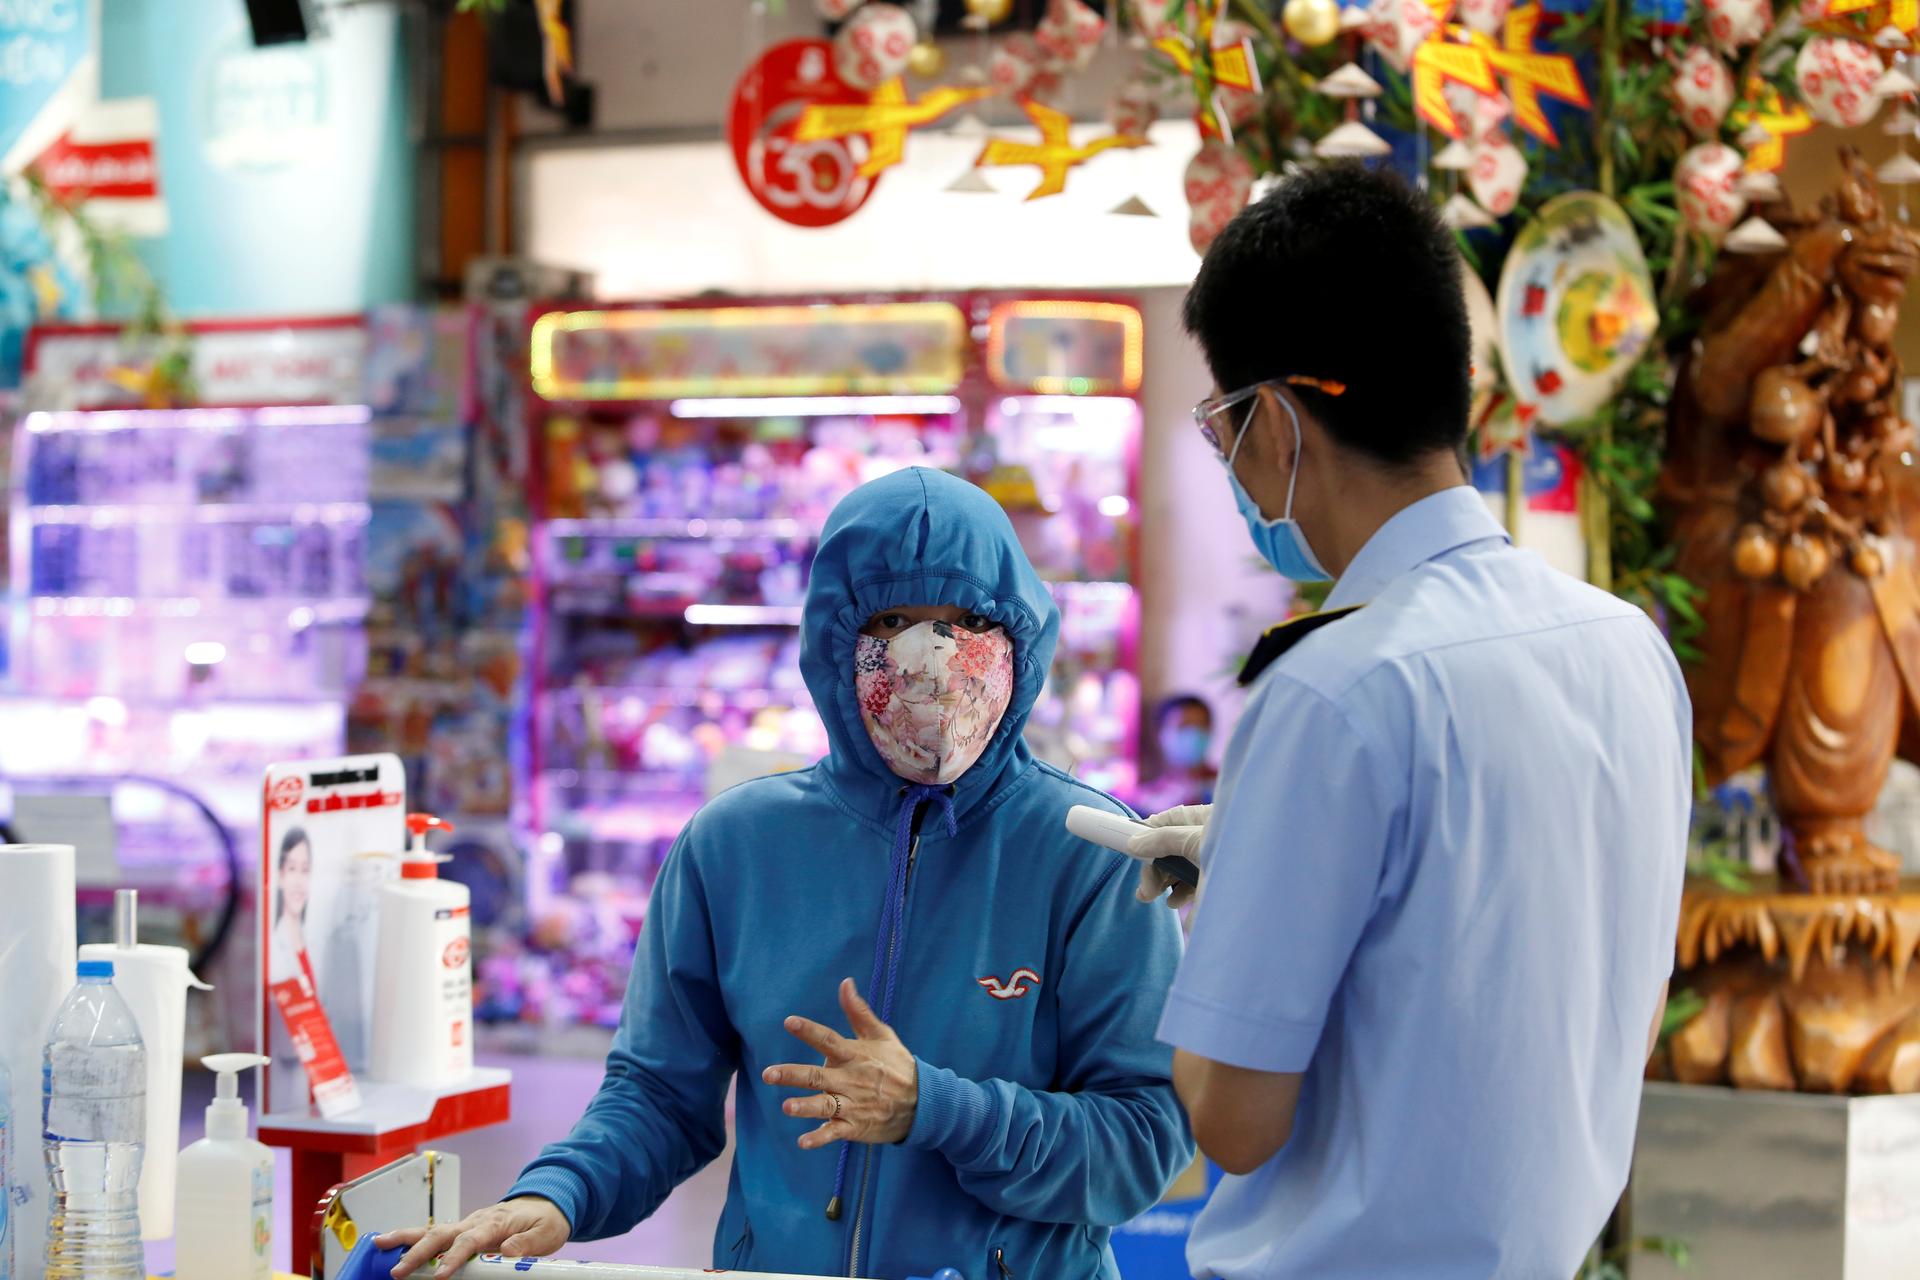 Vietnam to disburse $30 billion of public investment funds this year to tackle virus impact